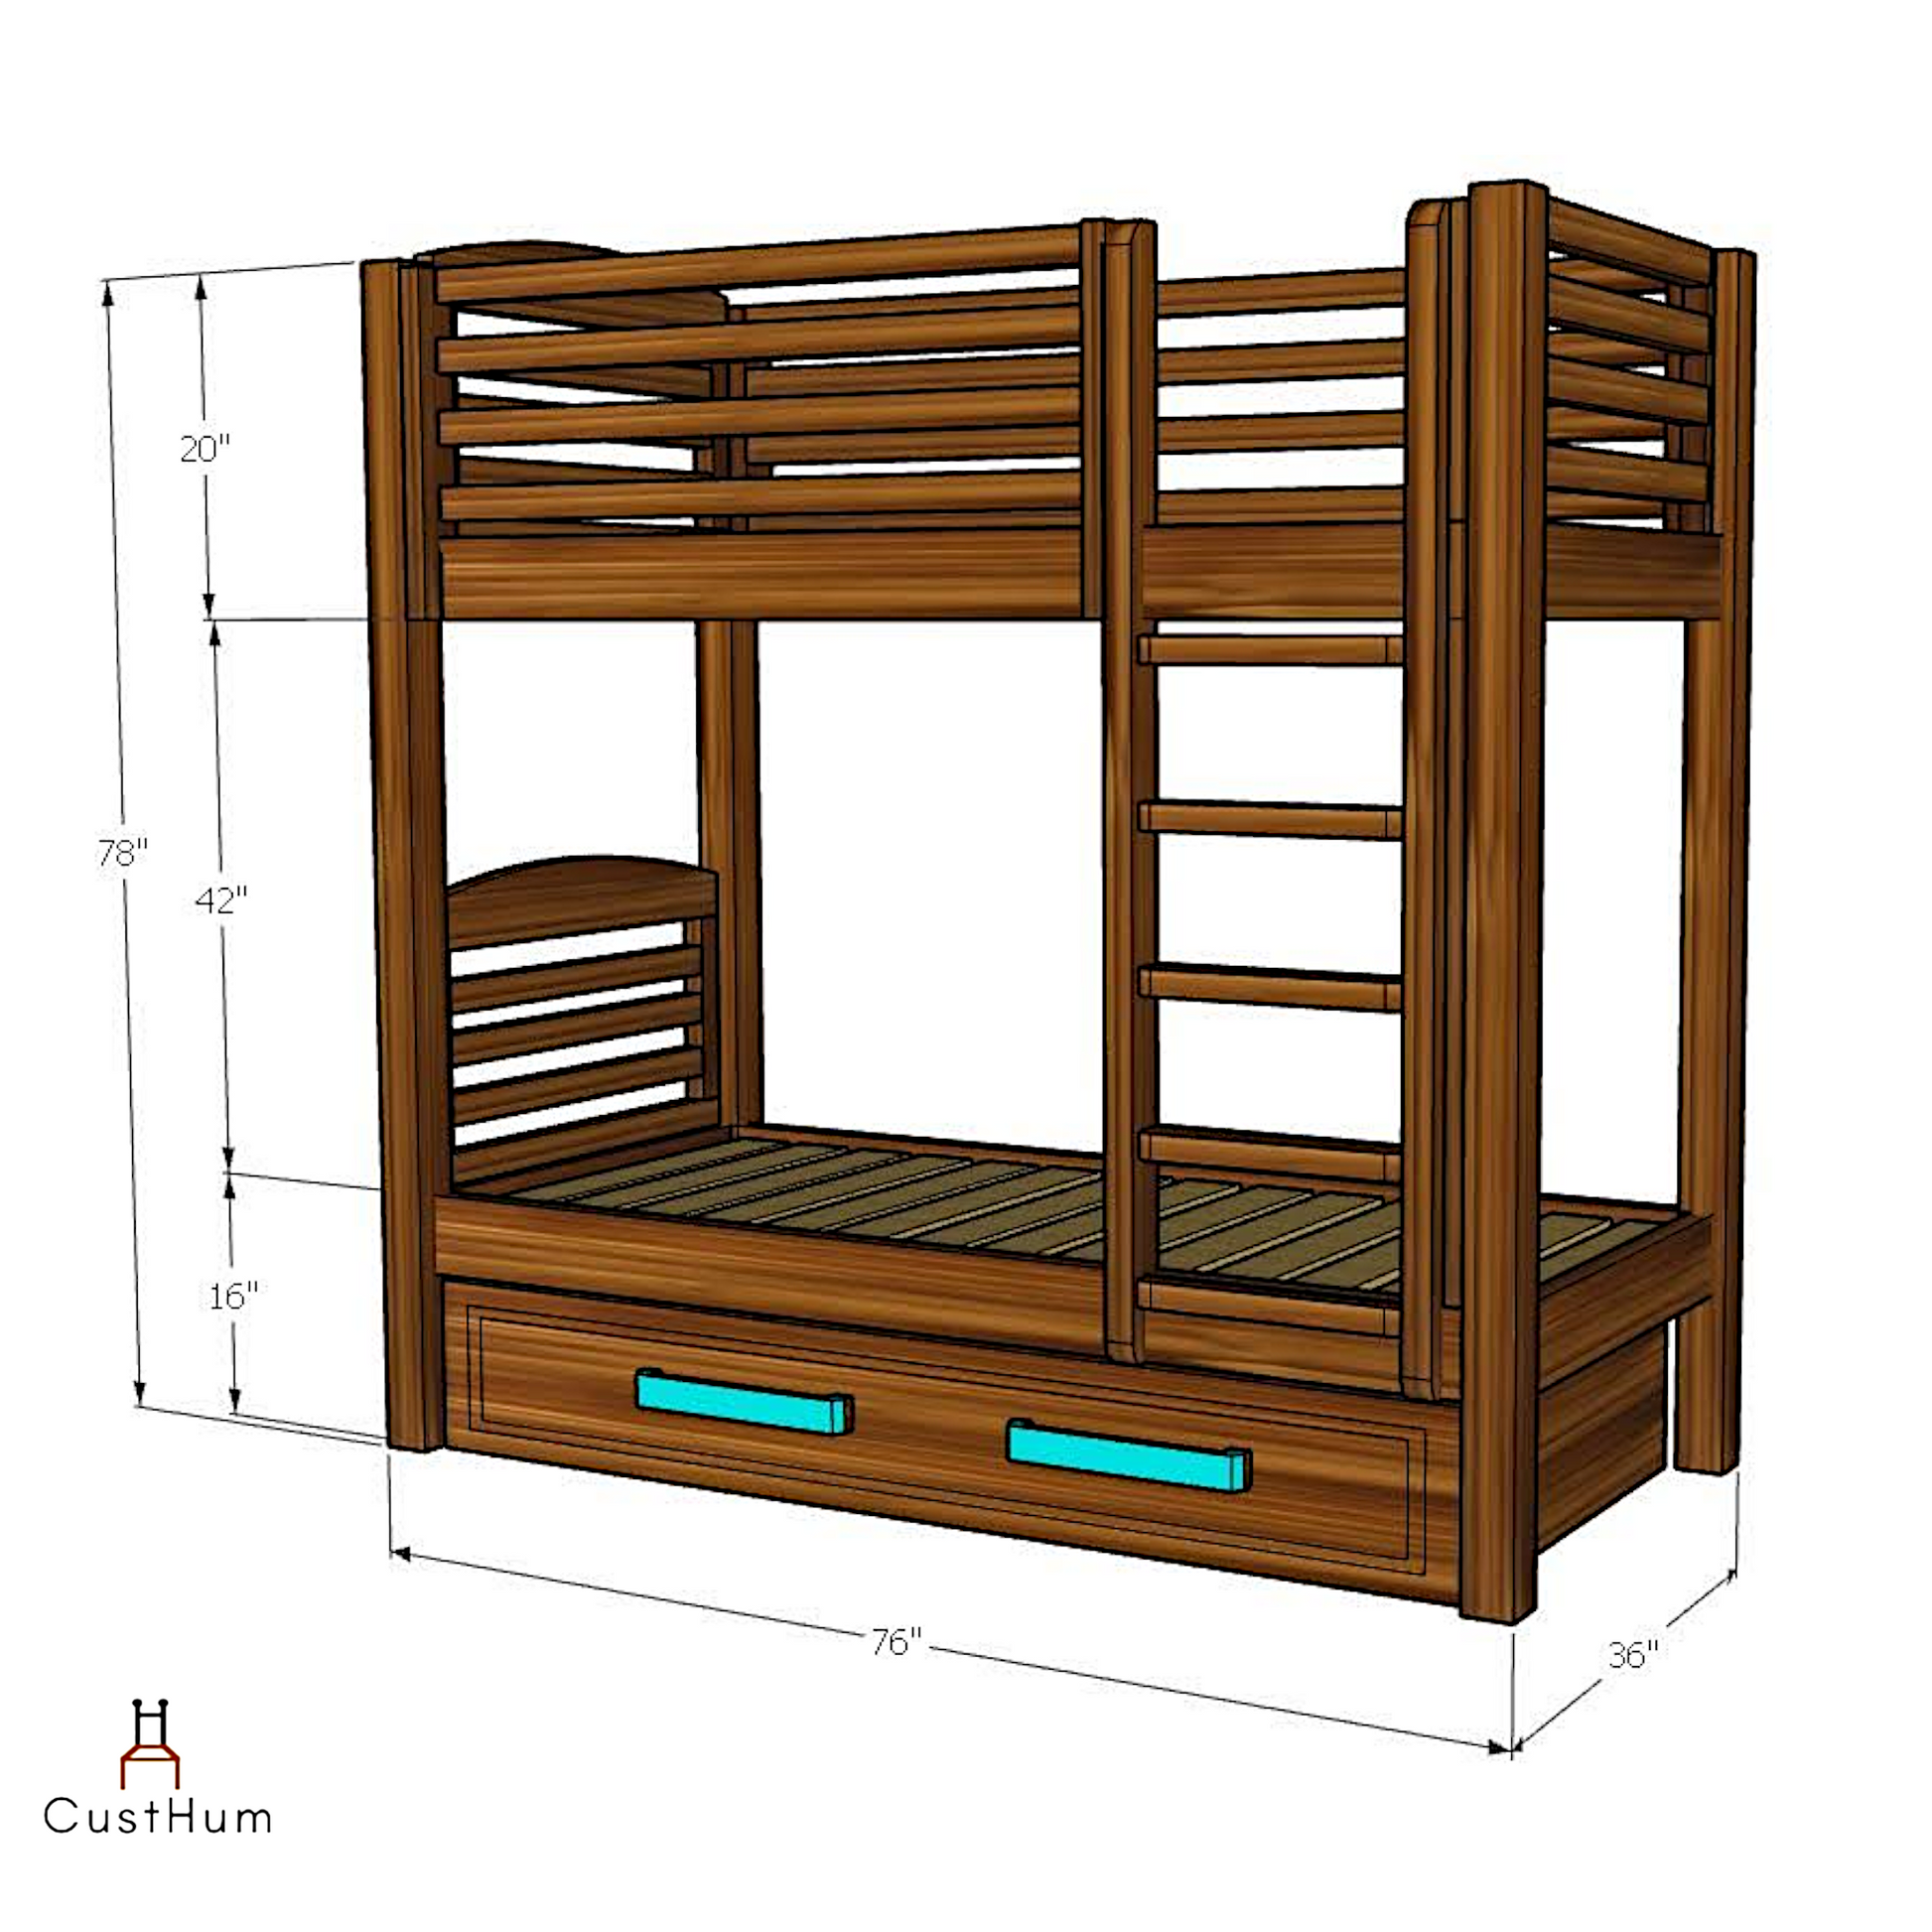 CustHum Genie-bunk bed for kids with removable under cot storage box with long handles-dimensions